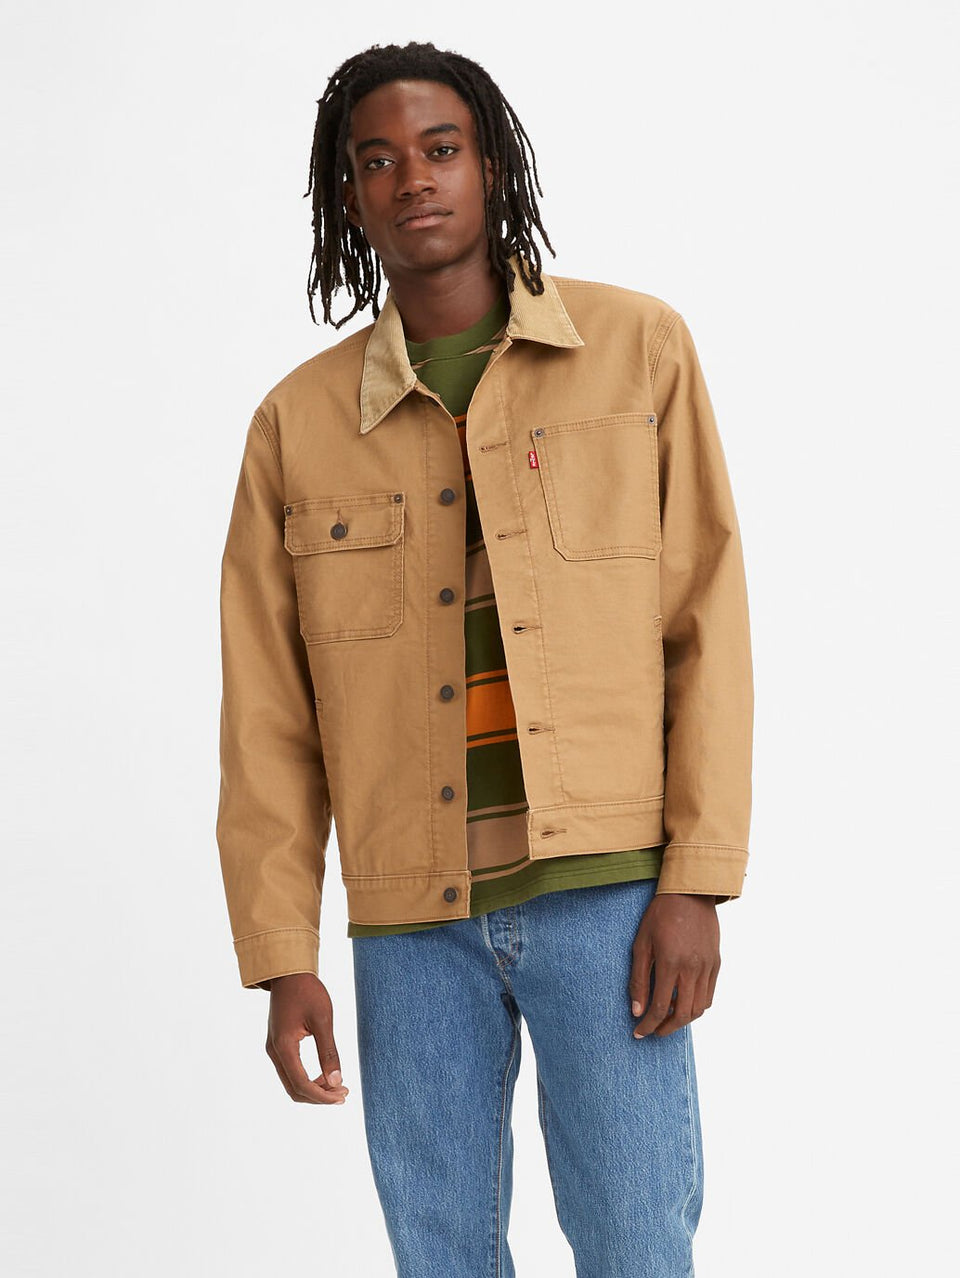 Levis The Fishing Jacket - Mossy Green – Stencil